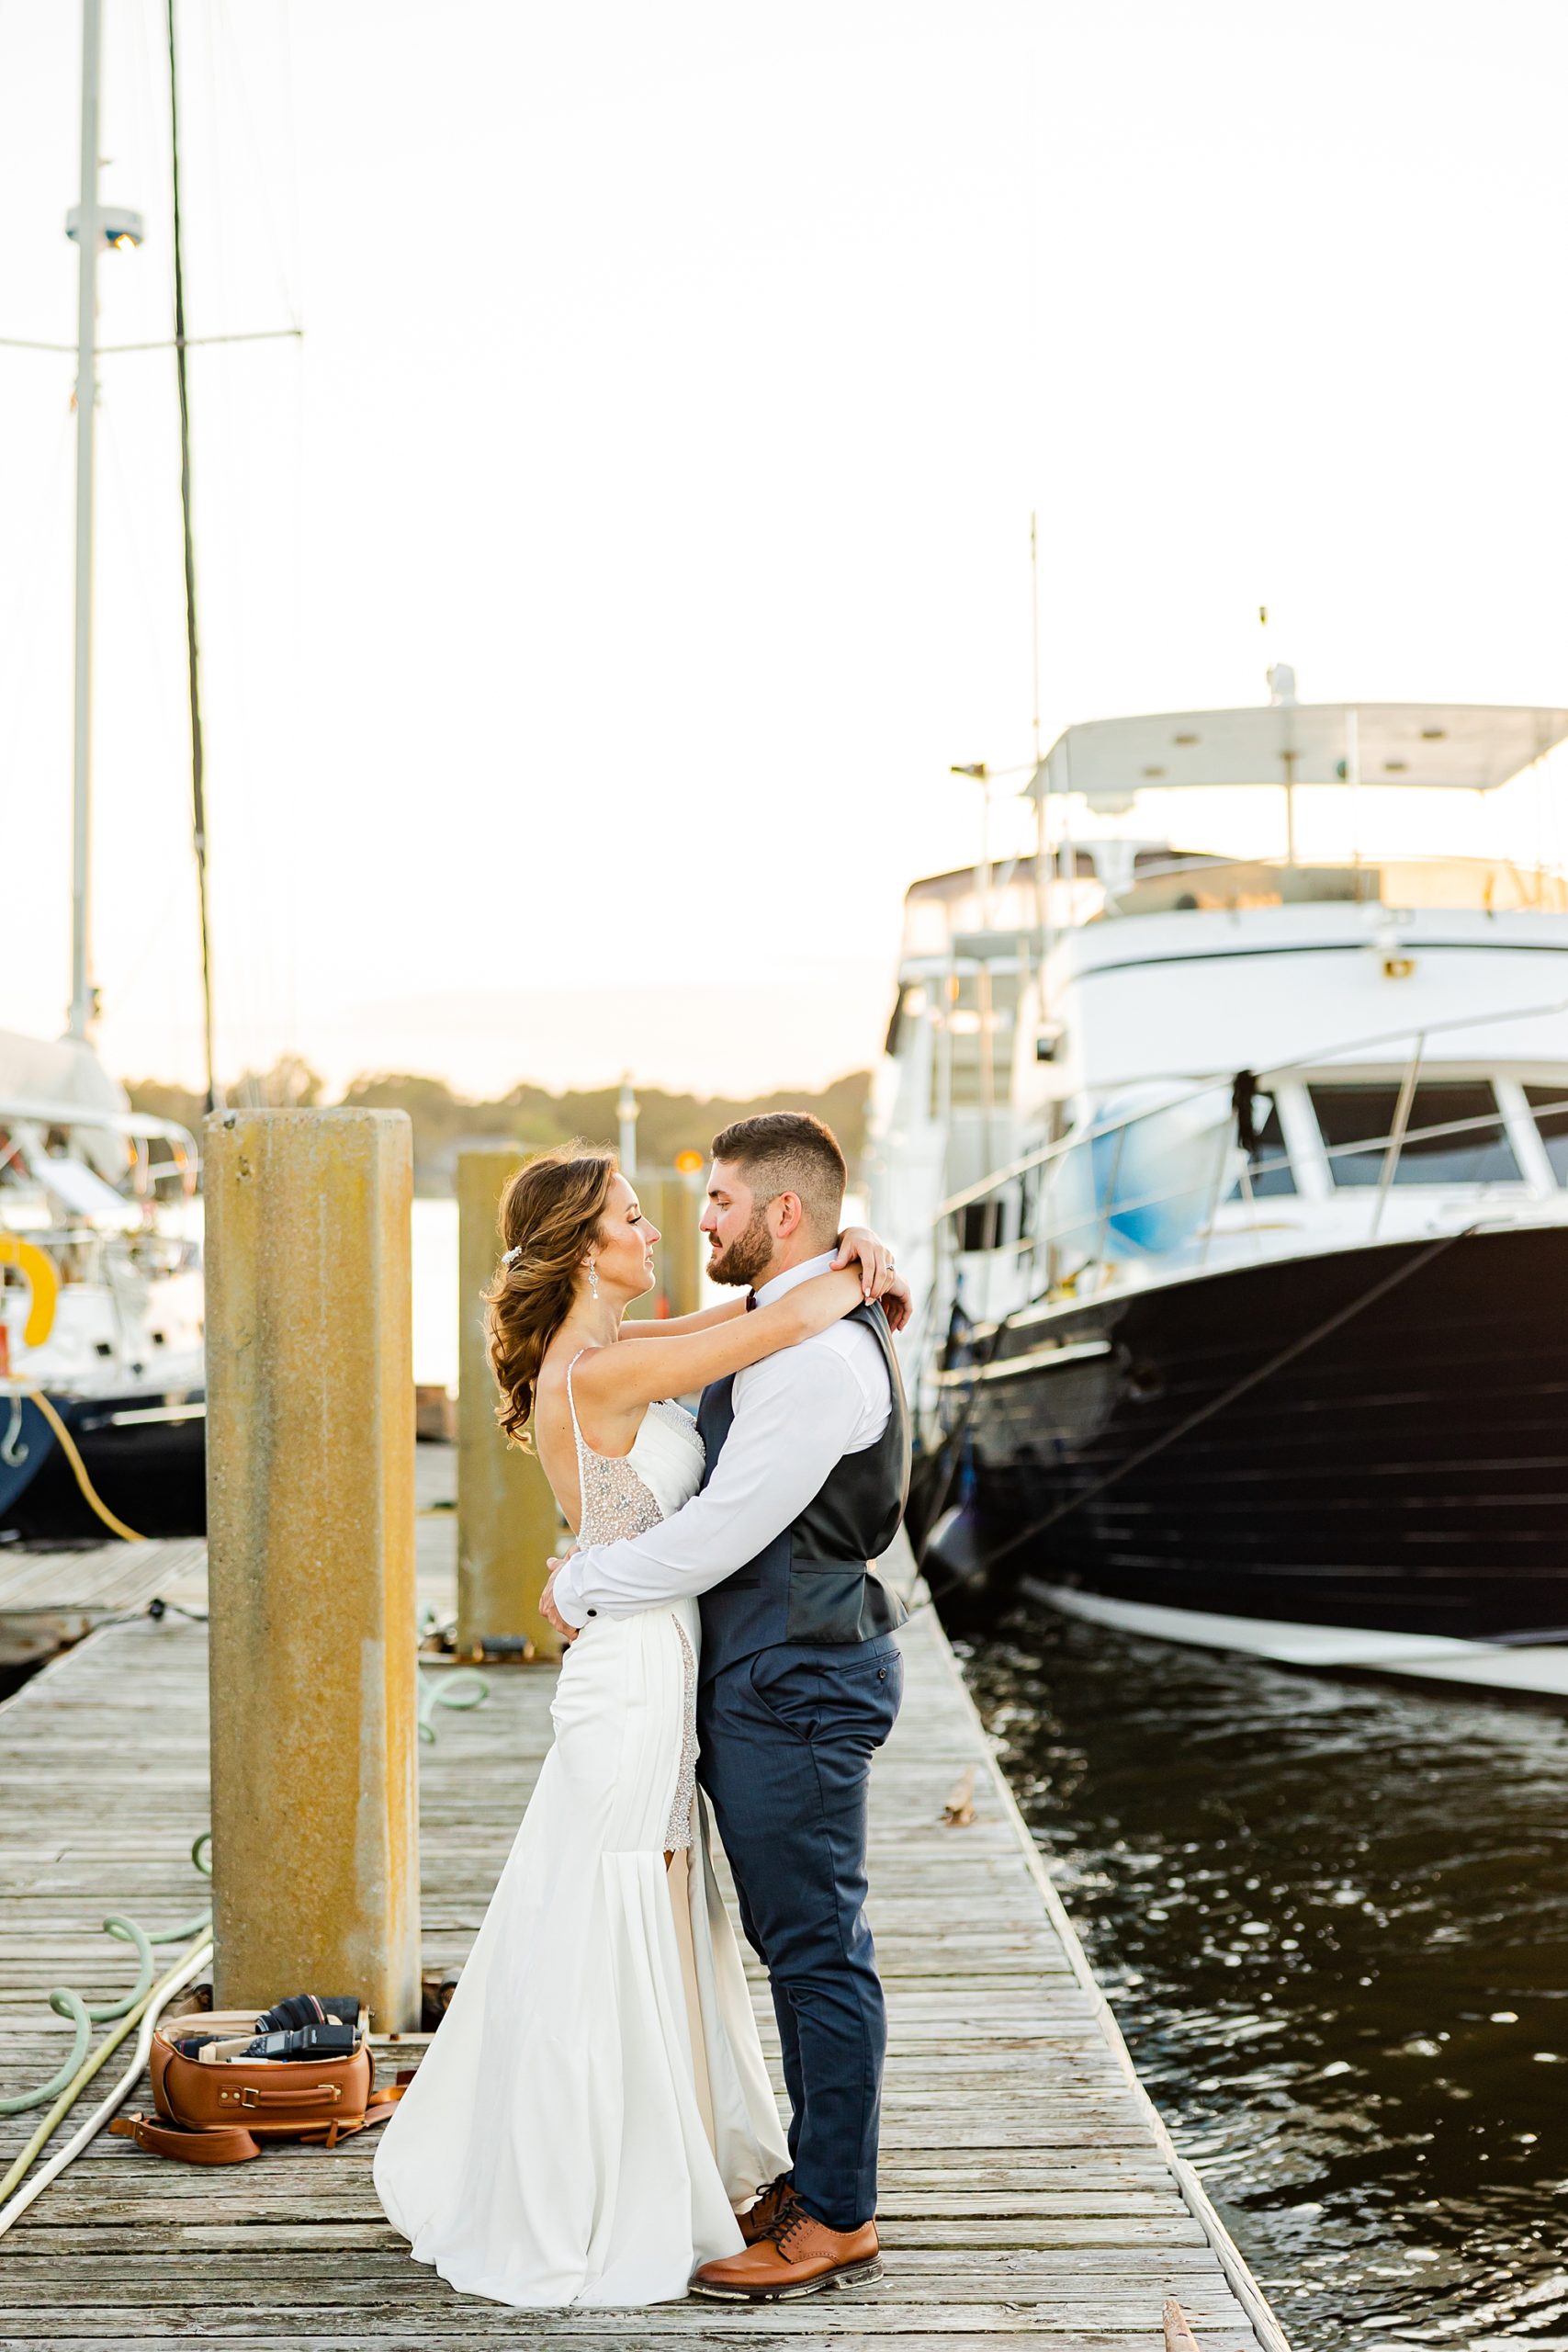 bride and groom hug on wooden pier by boat 